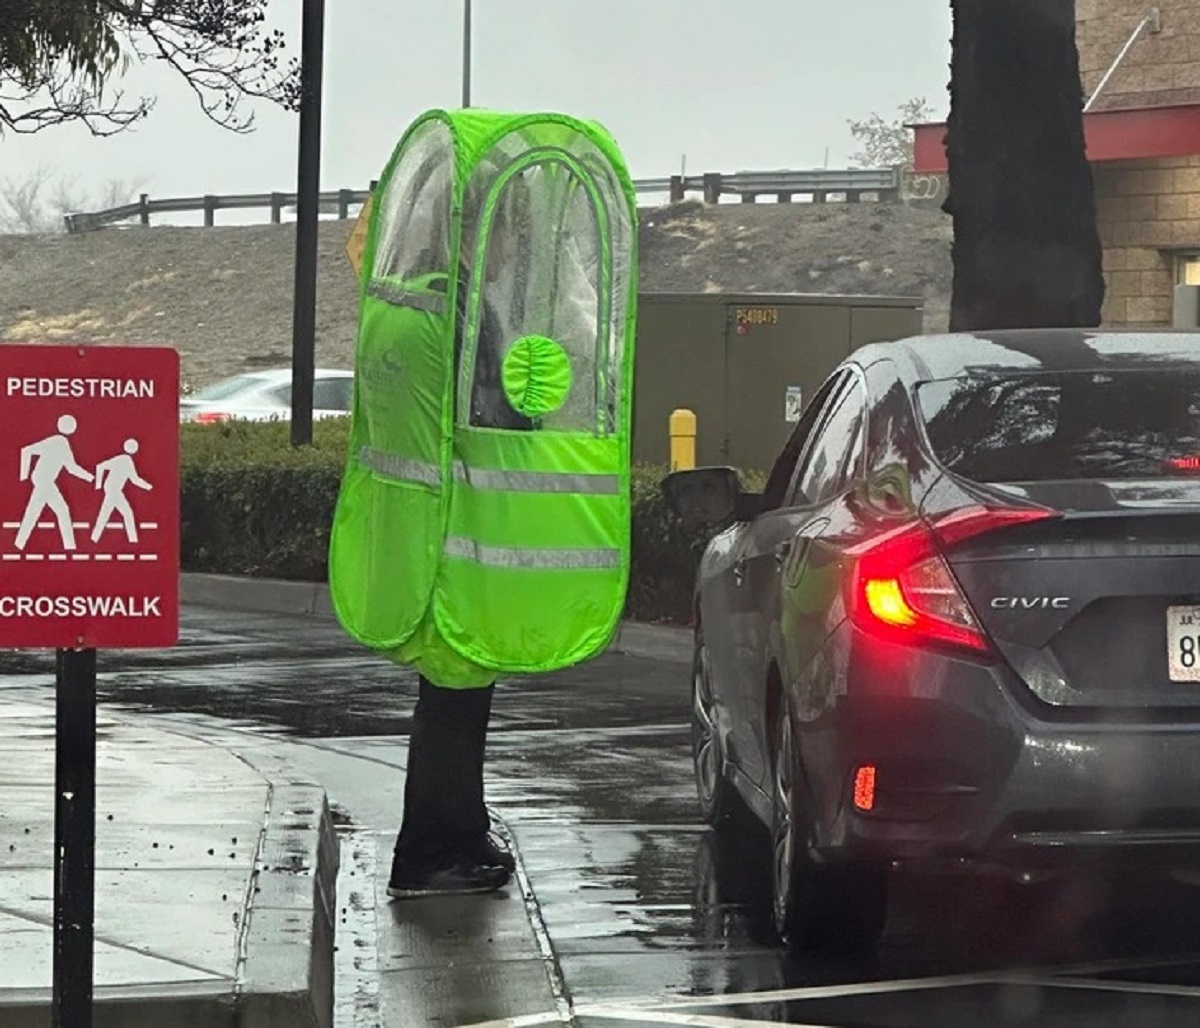 “This drive-thru worker’s shelter on a rainy day”